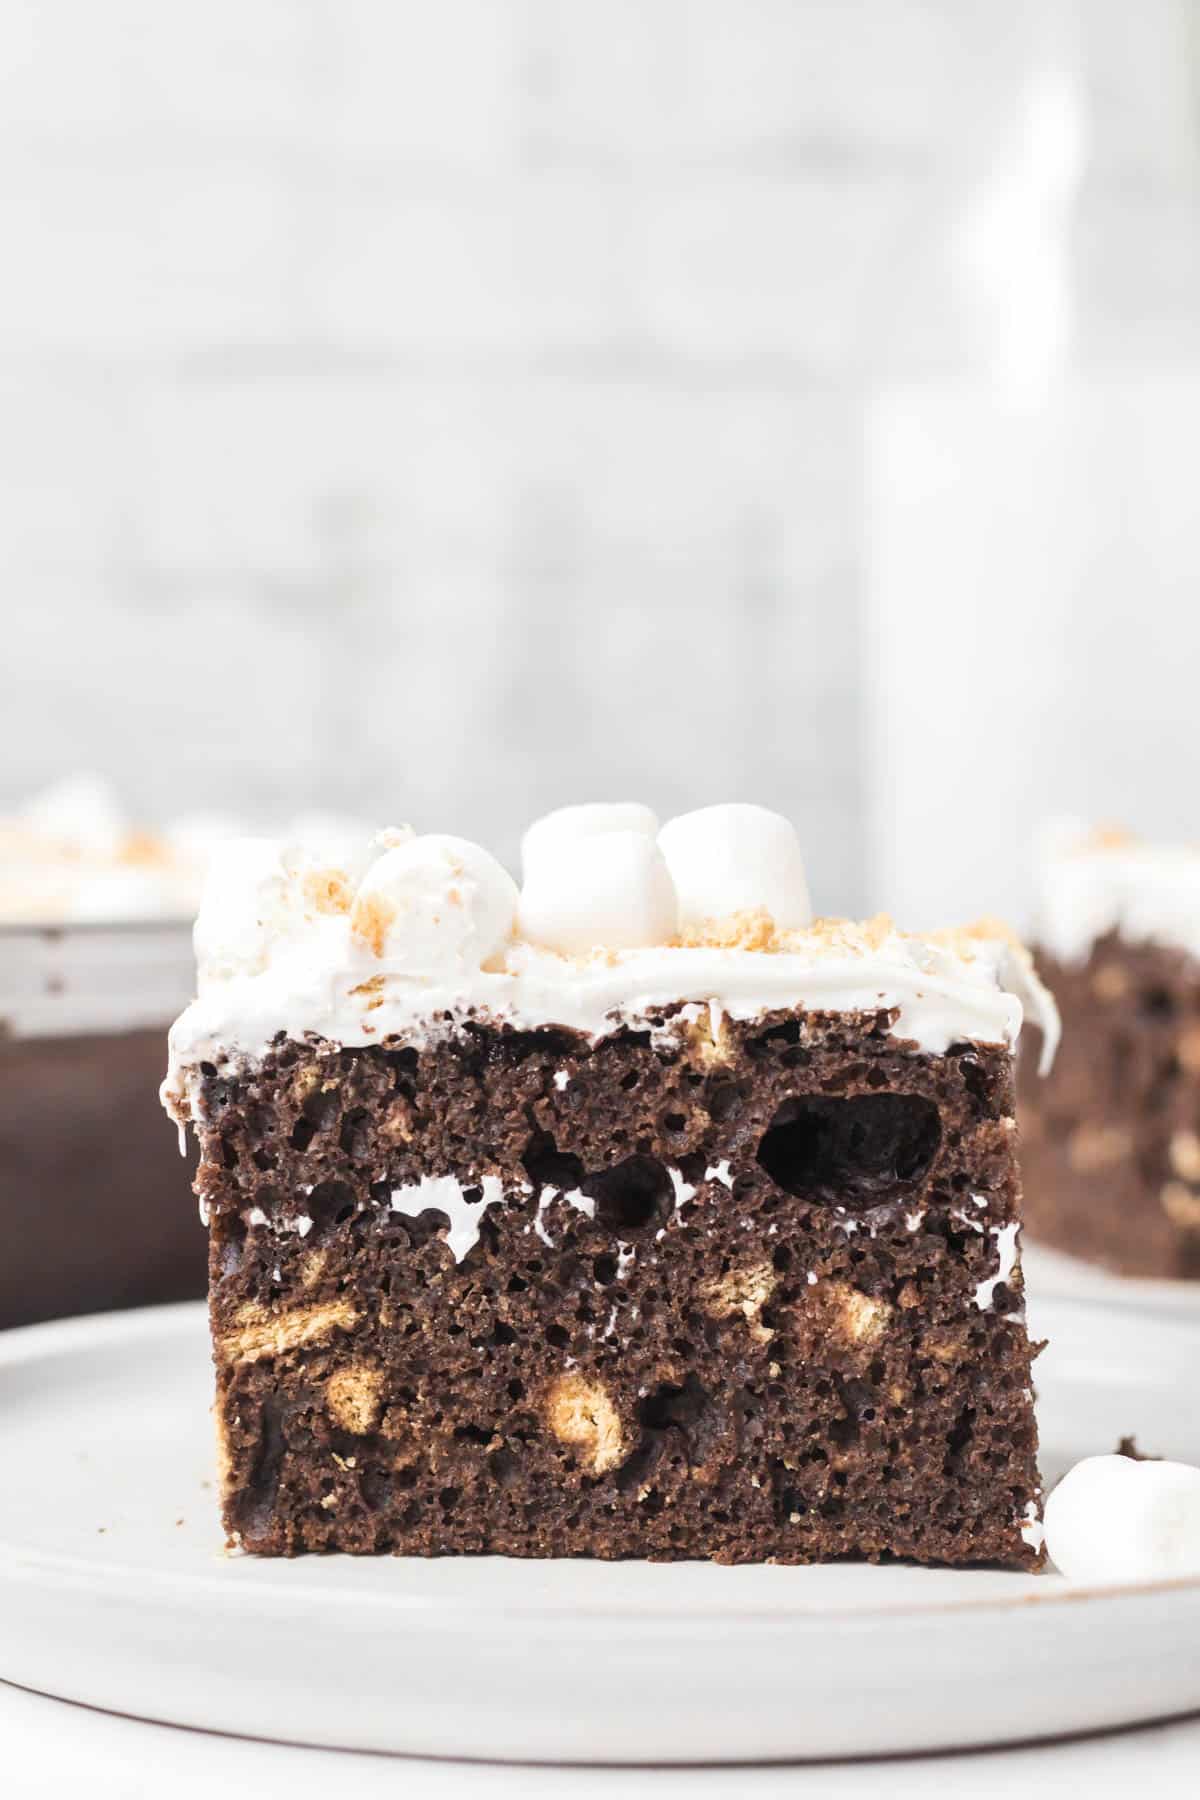 A chocolate easy s'mores cake recipe with crushed graham crackers topped with marshmallow frosting on a white plate.